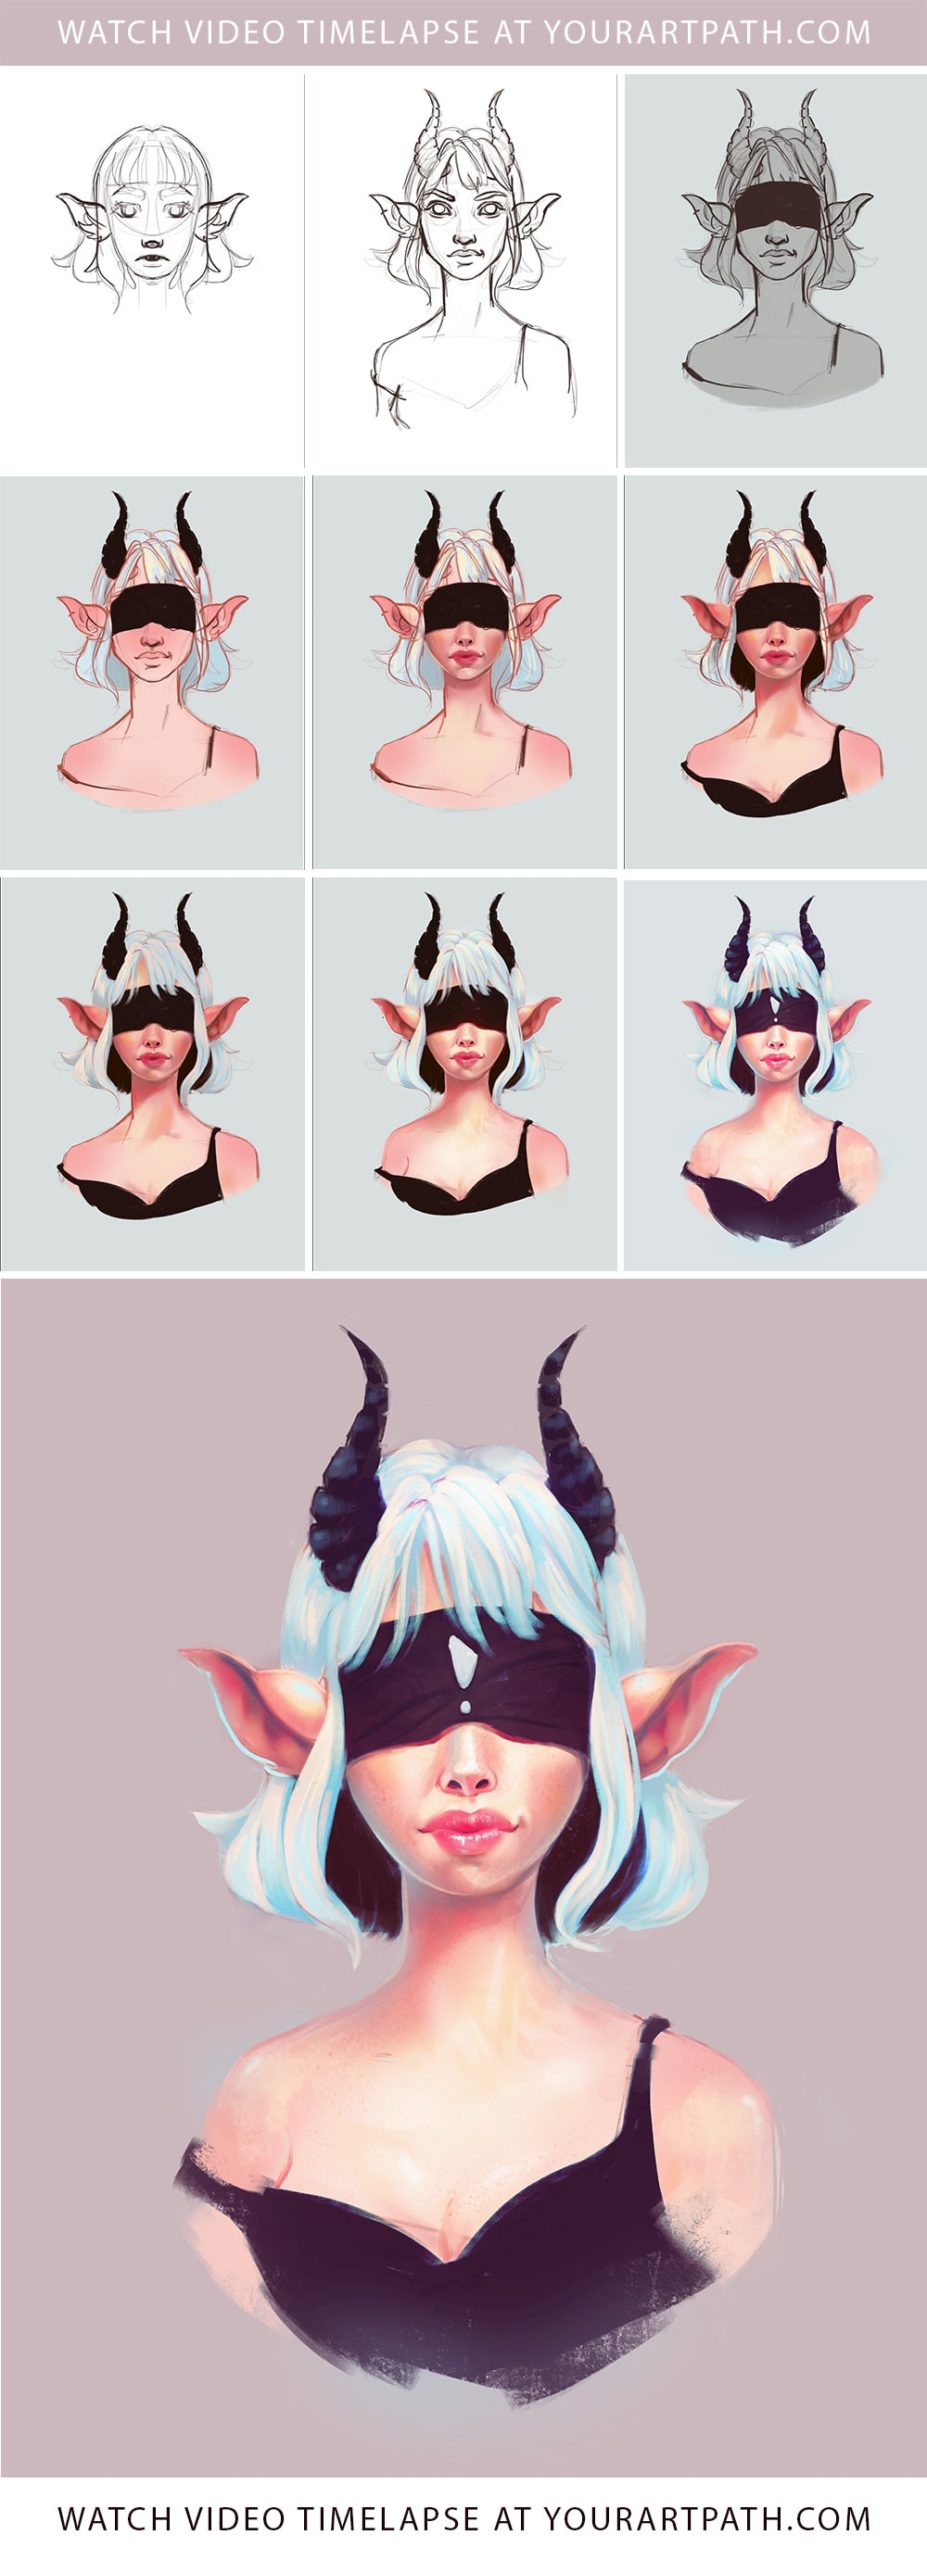 Digital Painting Procreate Process Step By Step. Digital art drawing tutorial. Draw this in your style challenge girl fae fairy easy.